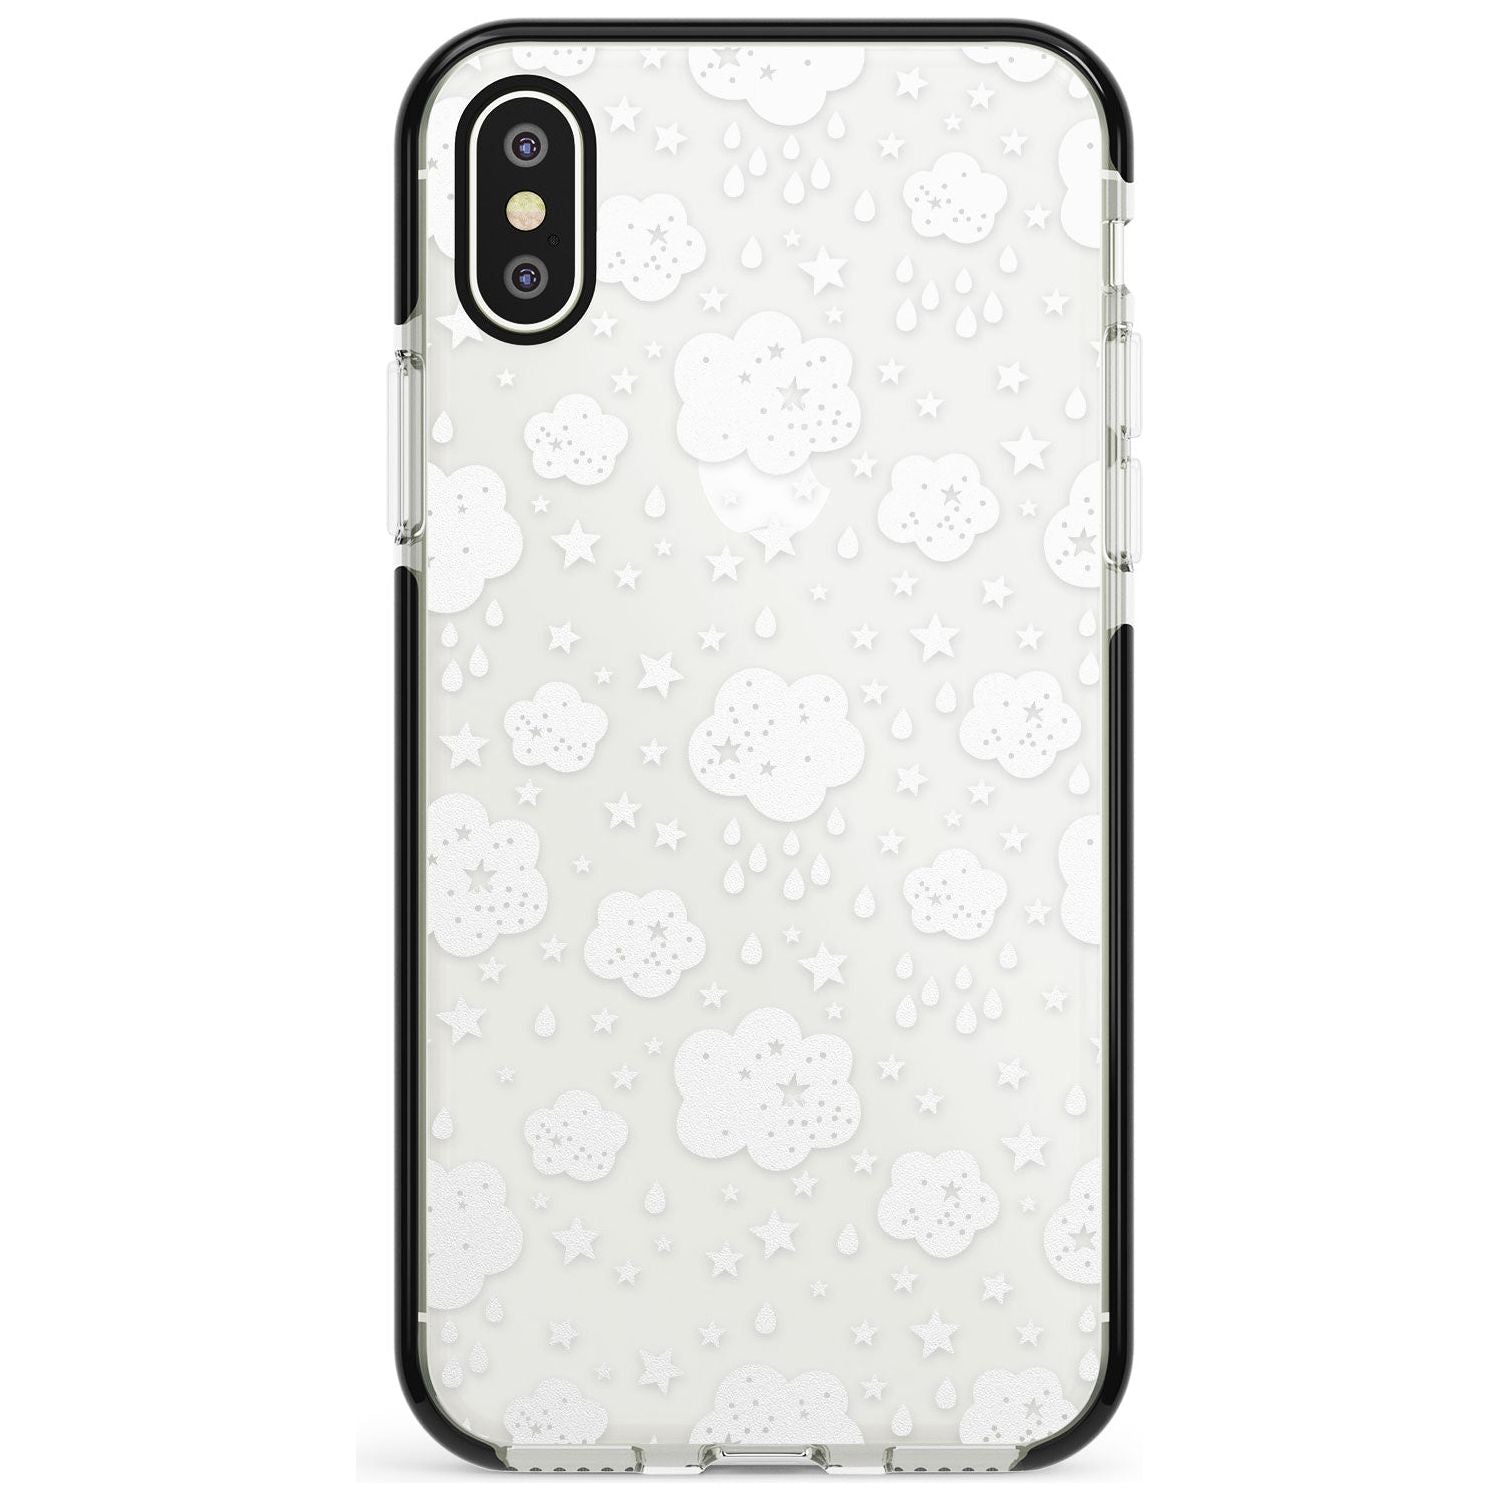 Rainy Days Black Impact Phone Case for iPhone X XS Max XR